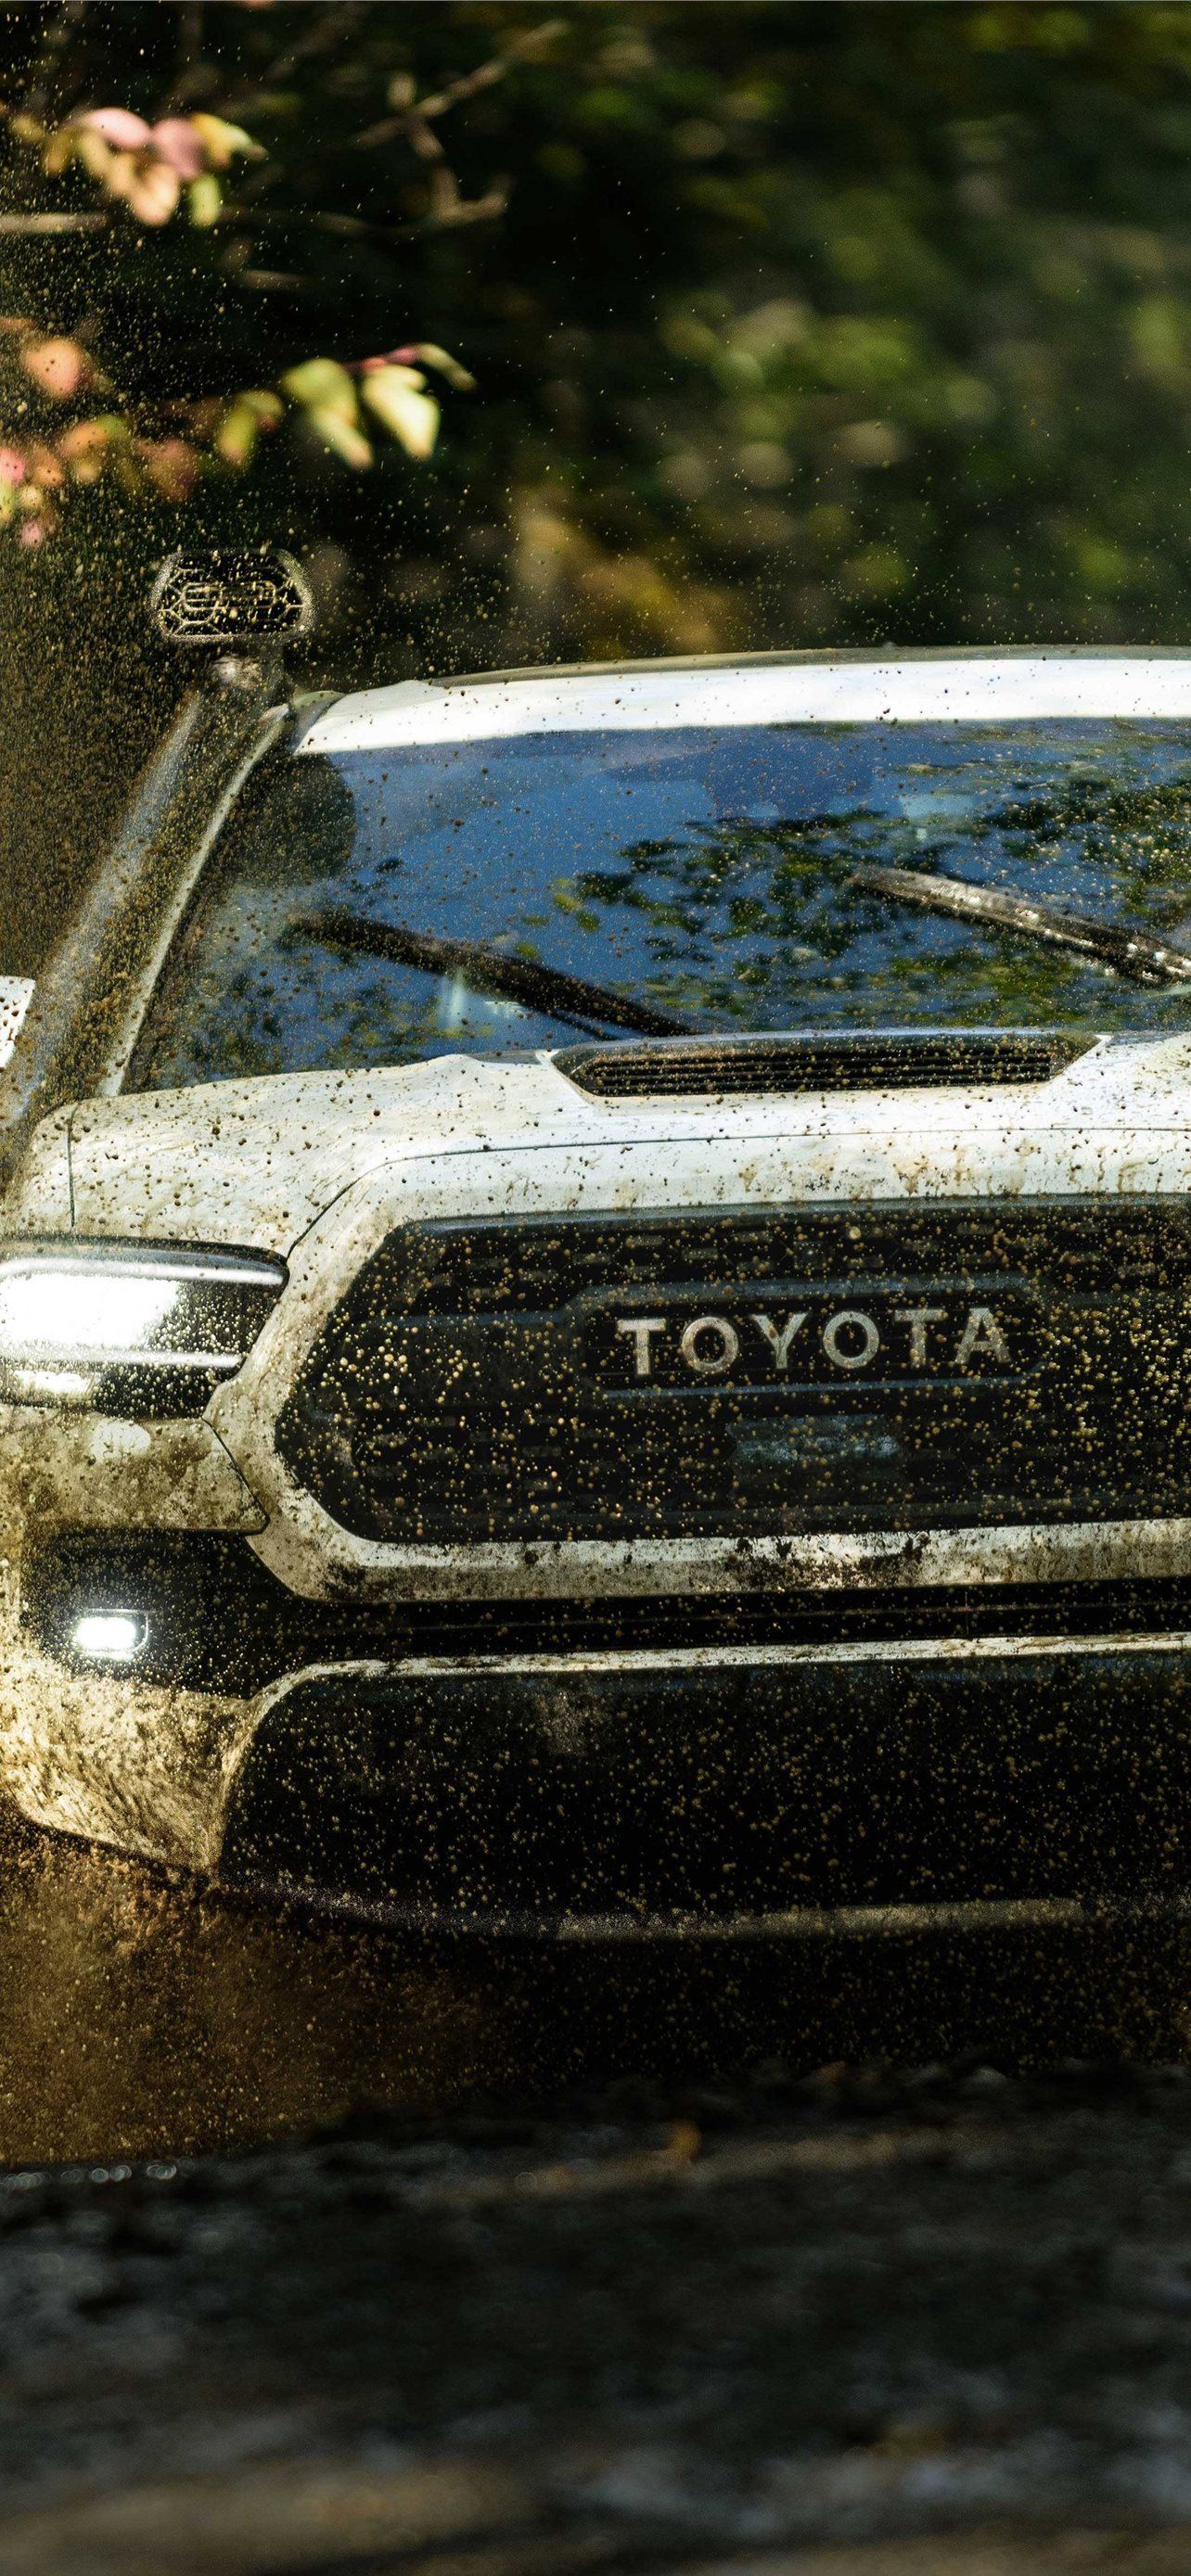 toyota hilux iPhone Wallpaper Free Download